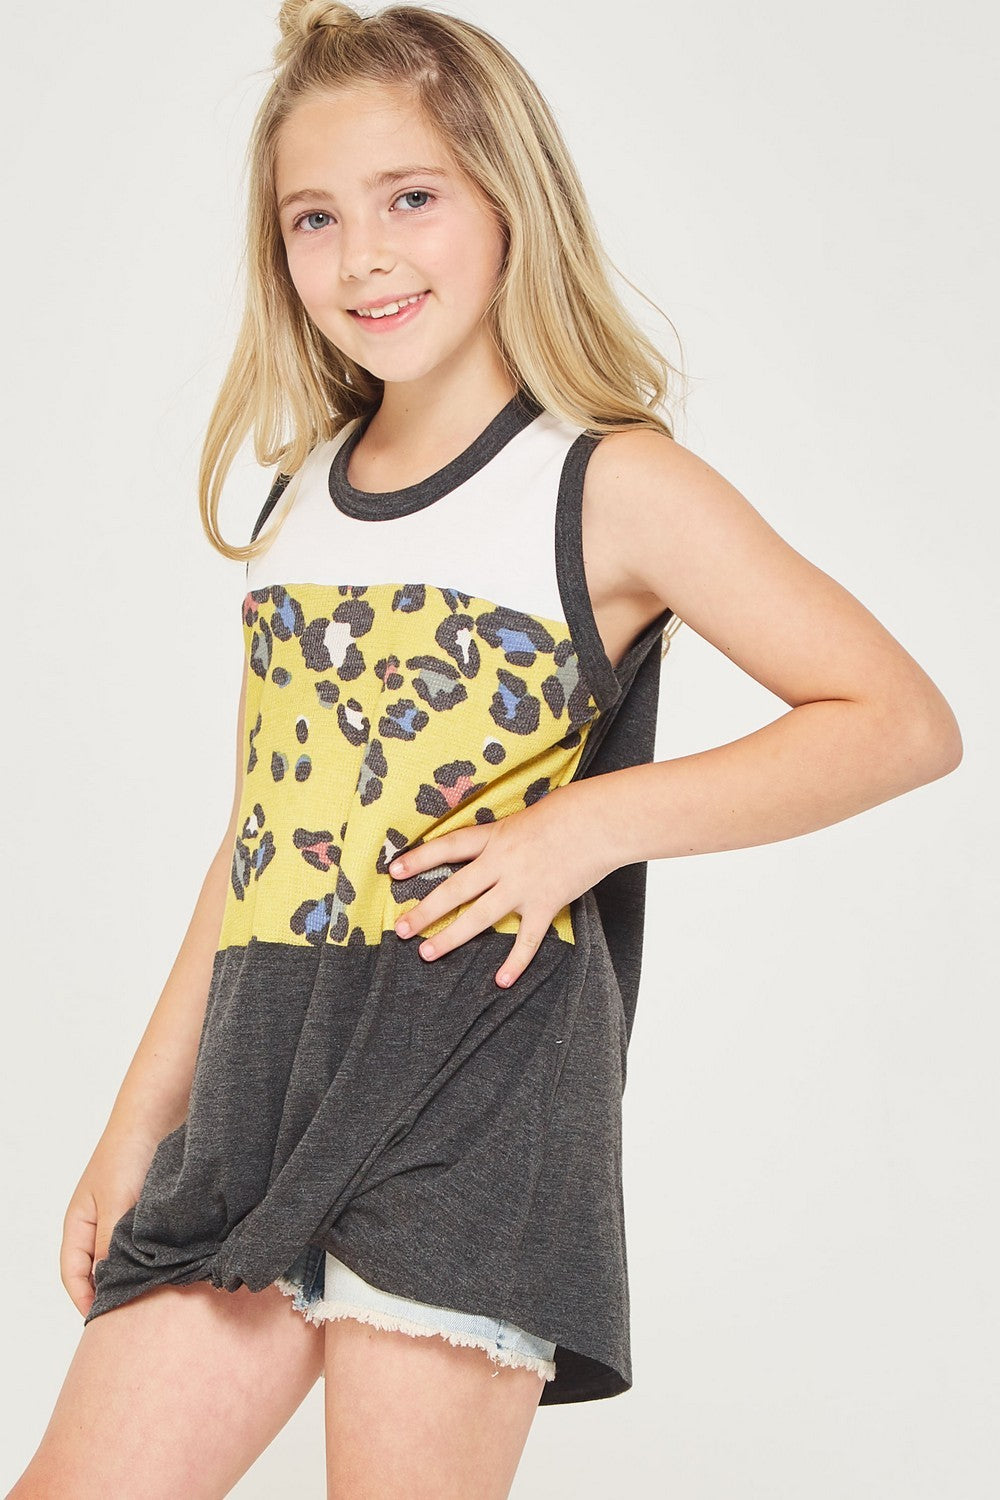 CHARCOAL YELLOW LEOPARD COLOR BLOCK TANK